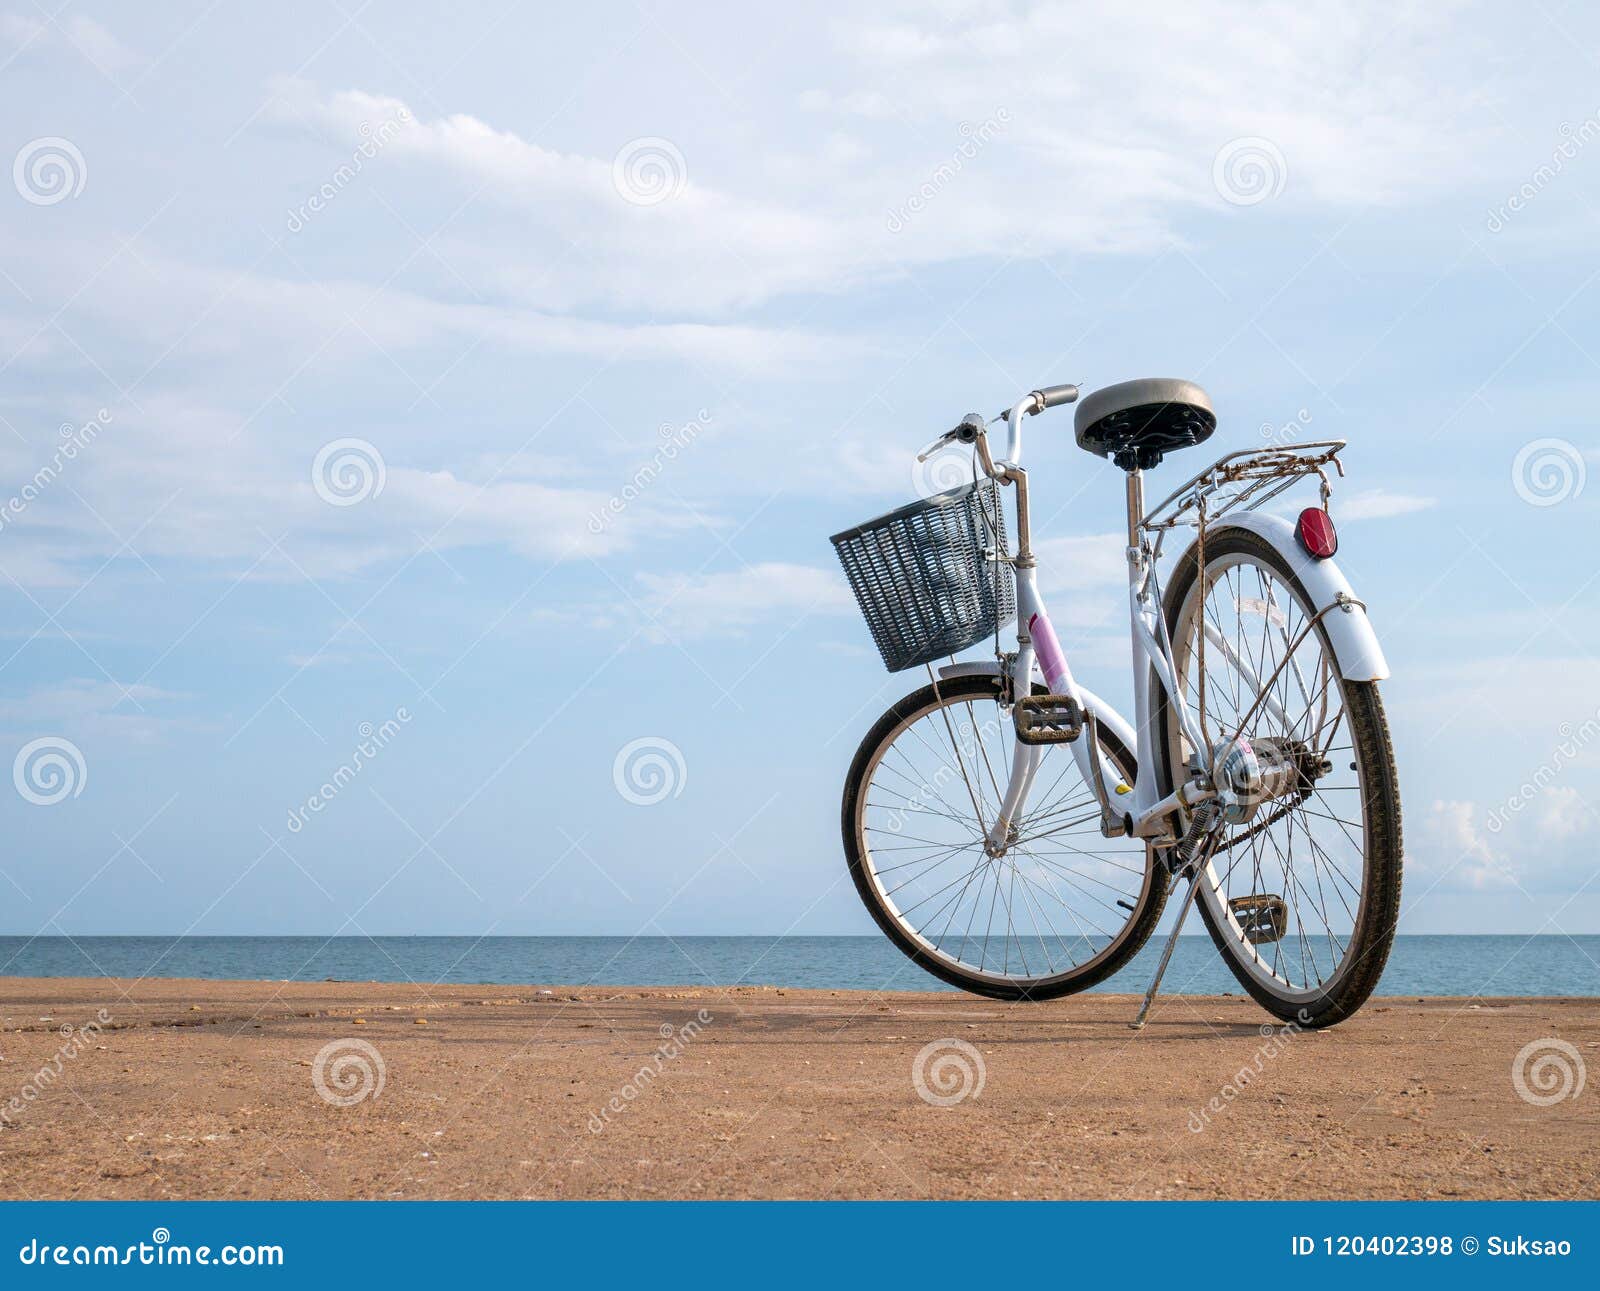 Bicycle beside the beach. stock photo. Image of cycle - 120402398